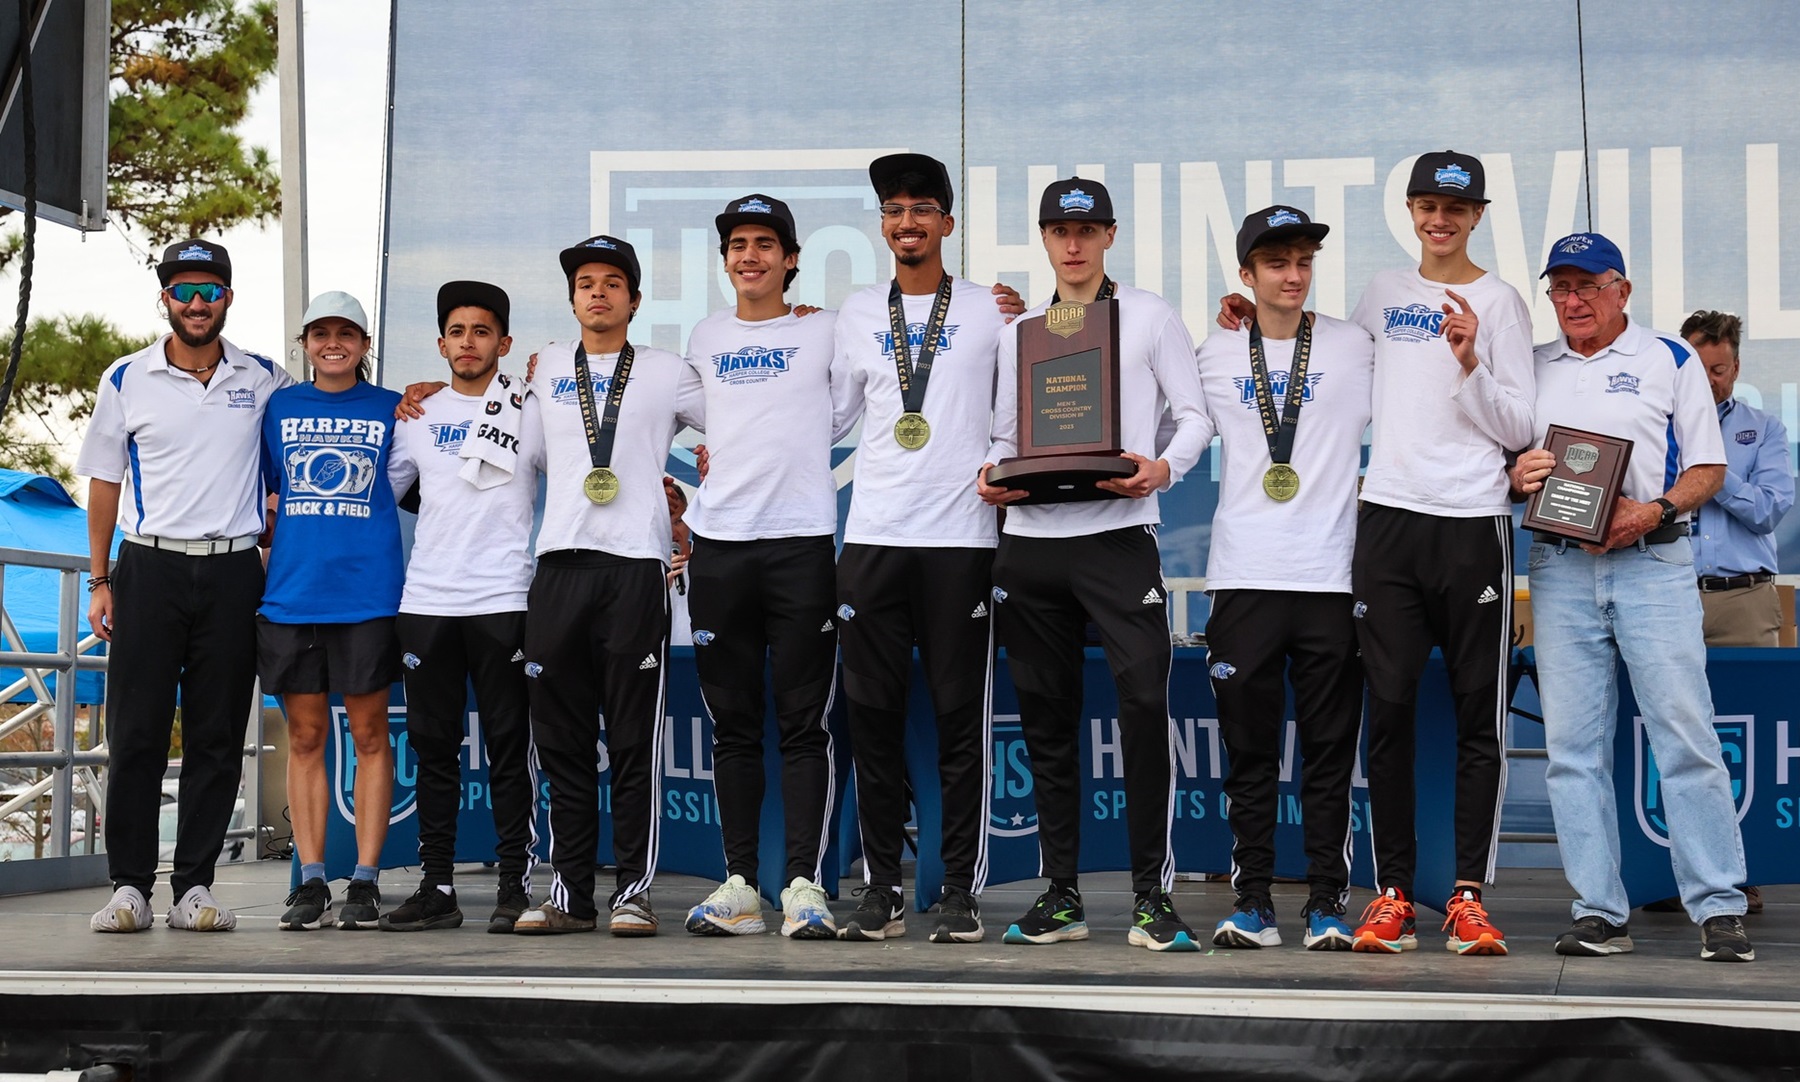 Harper College's Men's Cross Country Team won the 2023 Division III National Championships.